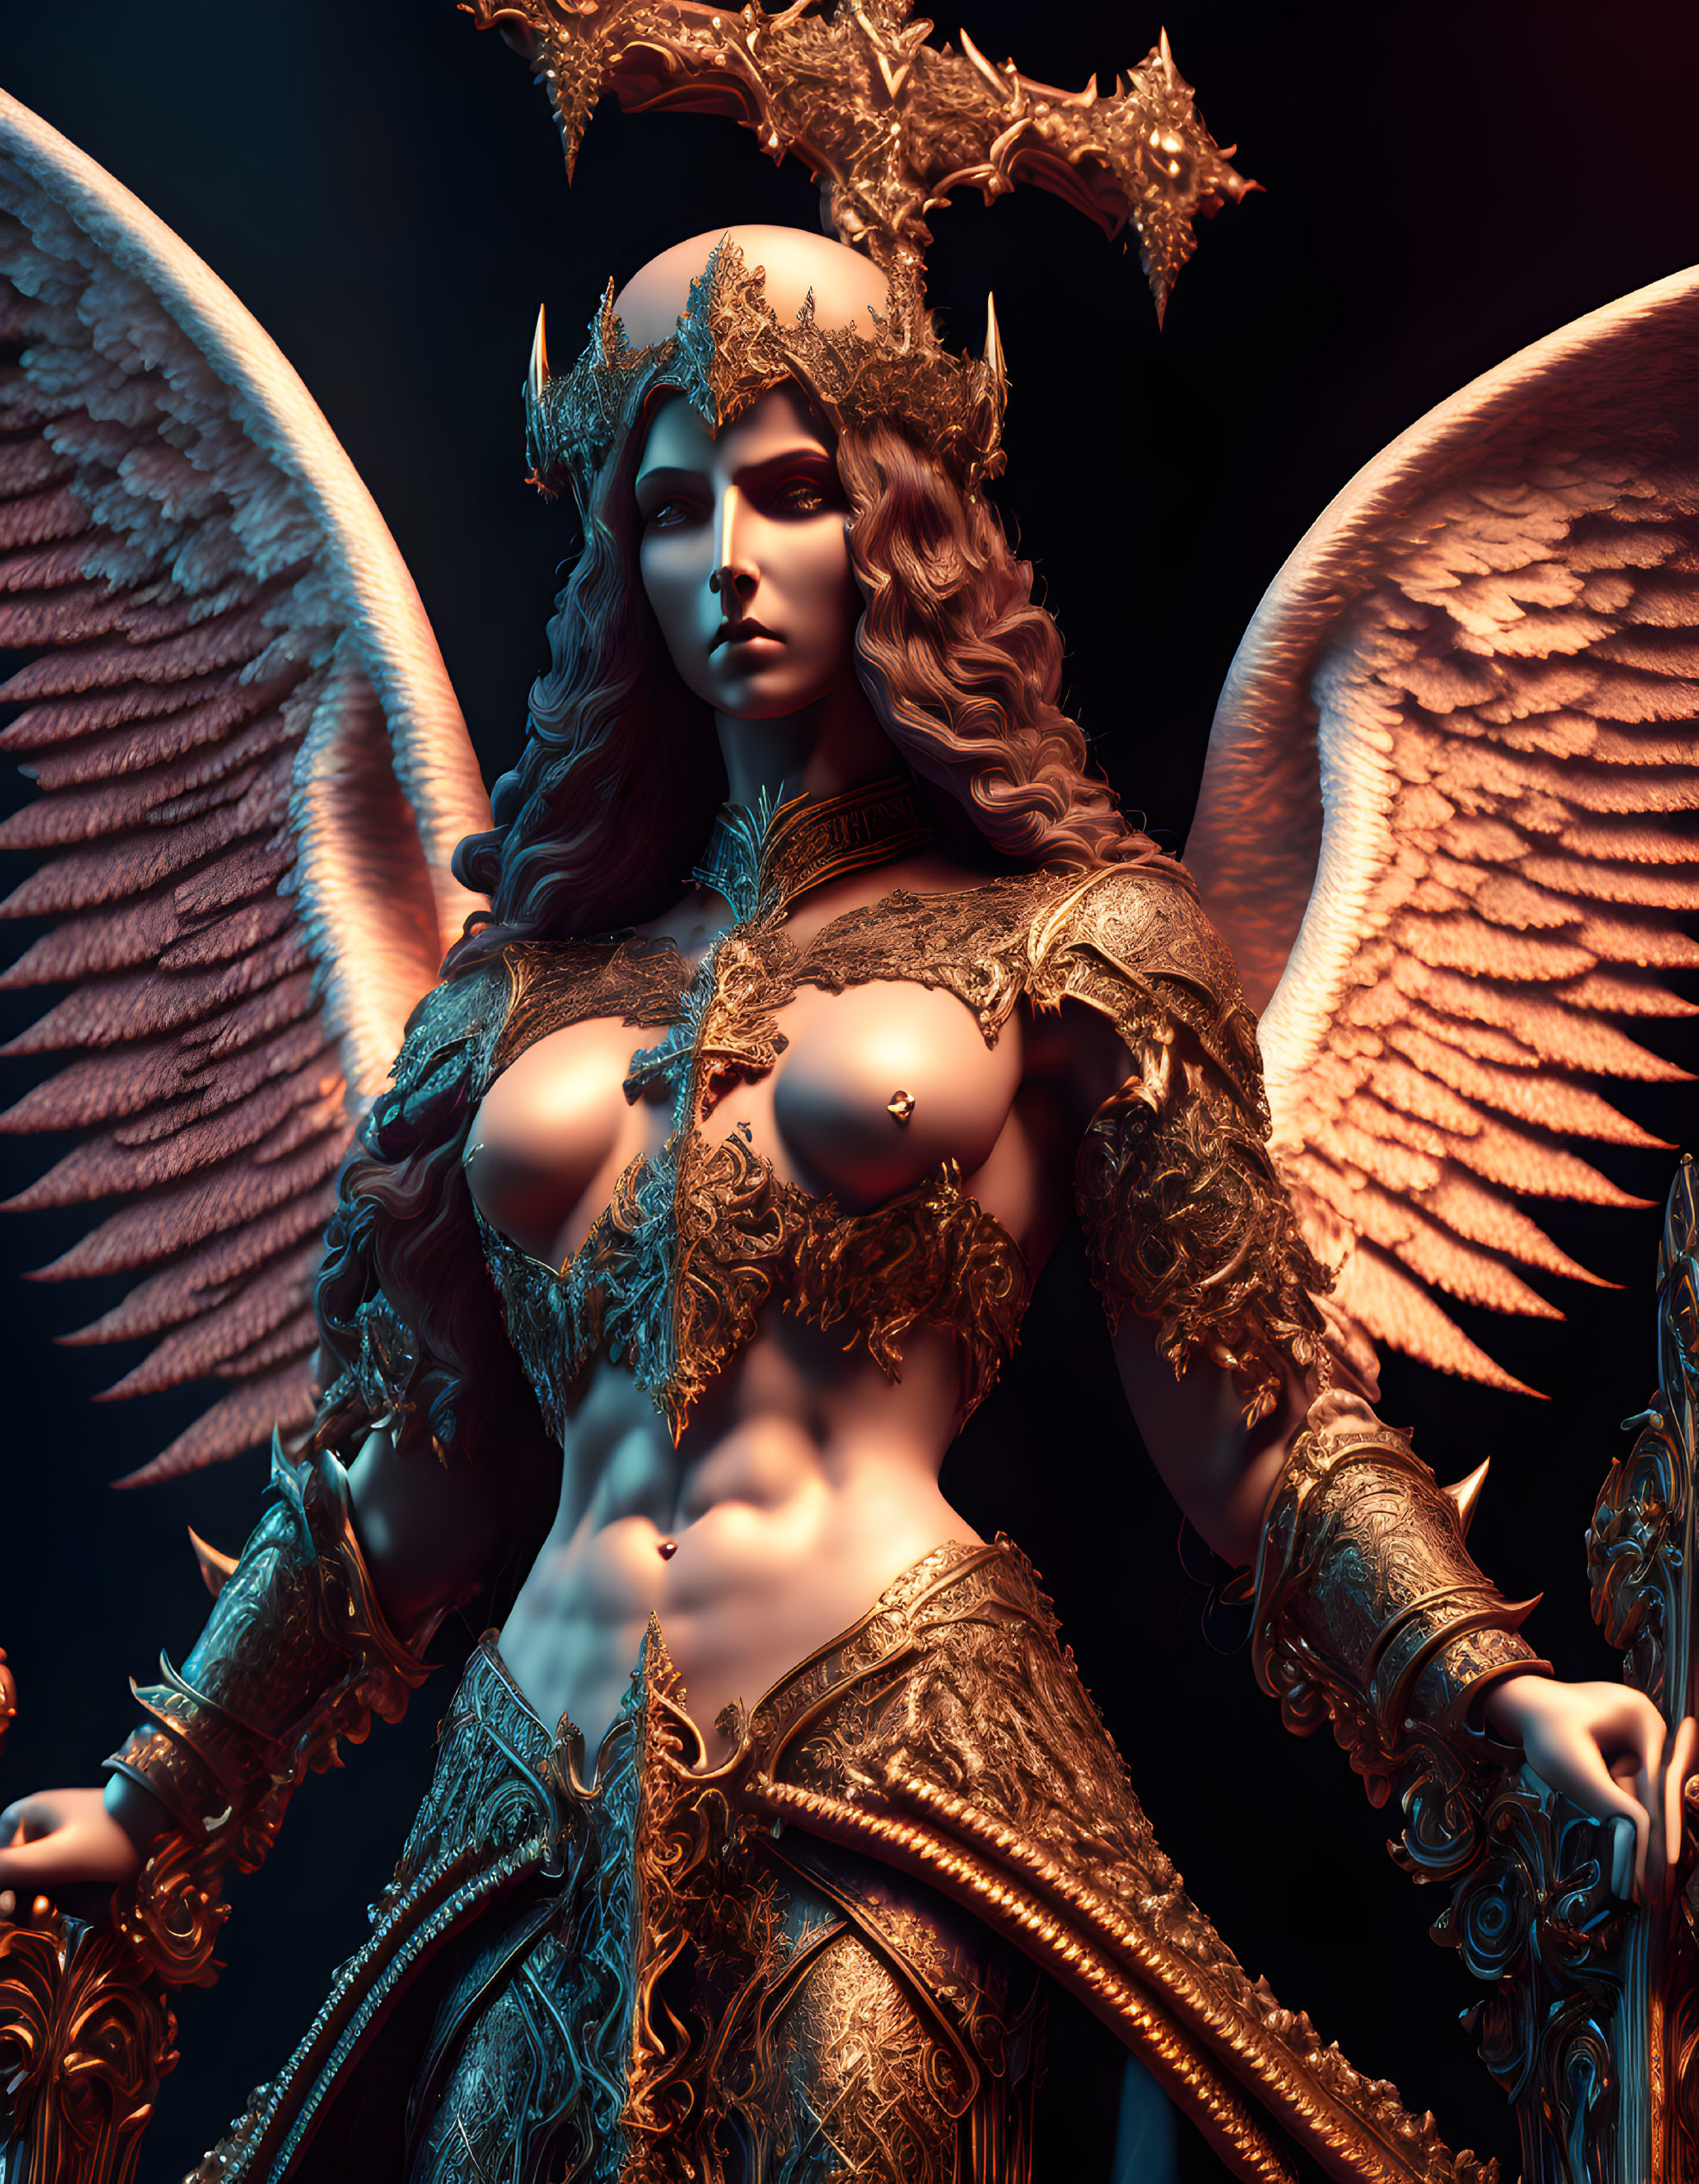 Detailed 3D rendering of fantasy female warrior with feathered wings and golden armor